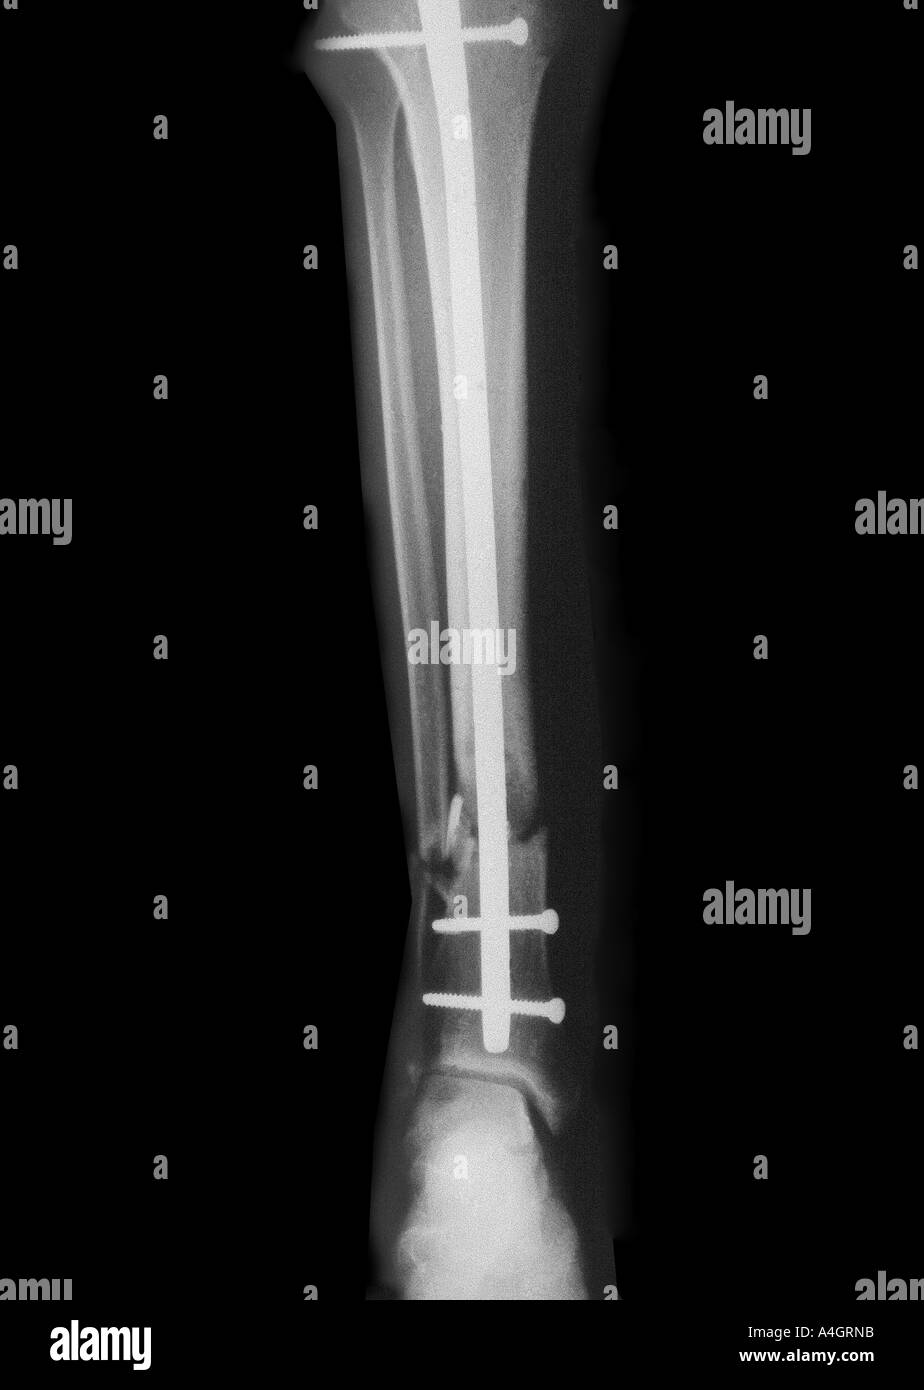 Case: Male 45 Heavy Smoker, Suspected Poly-Substance Abuse Closed Tibial  Fracture - OrthoXel